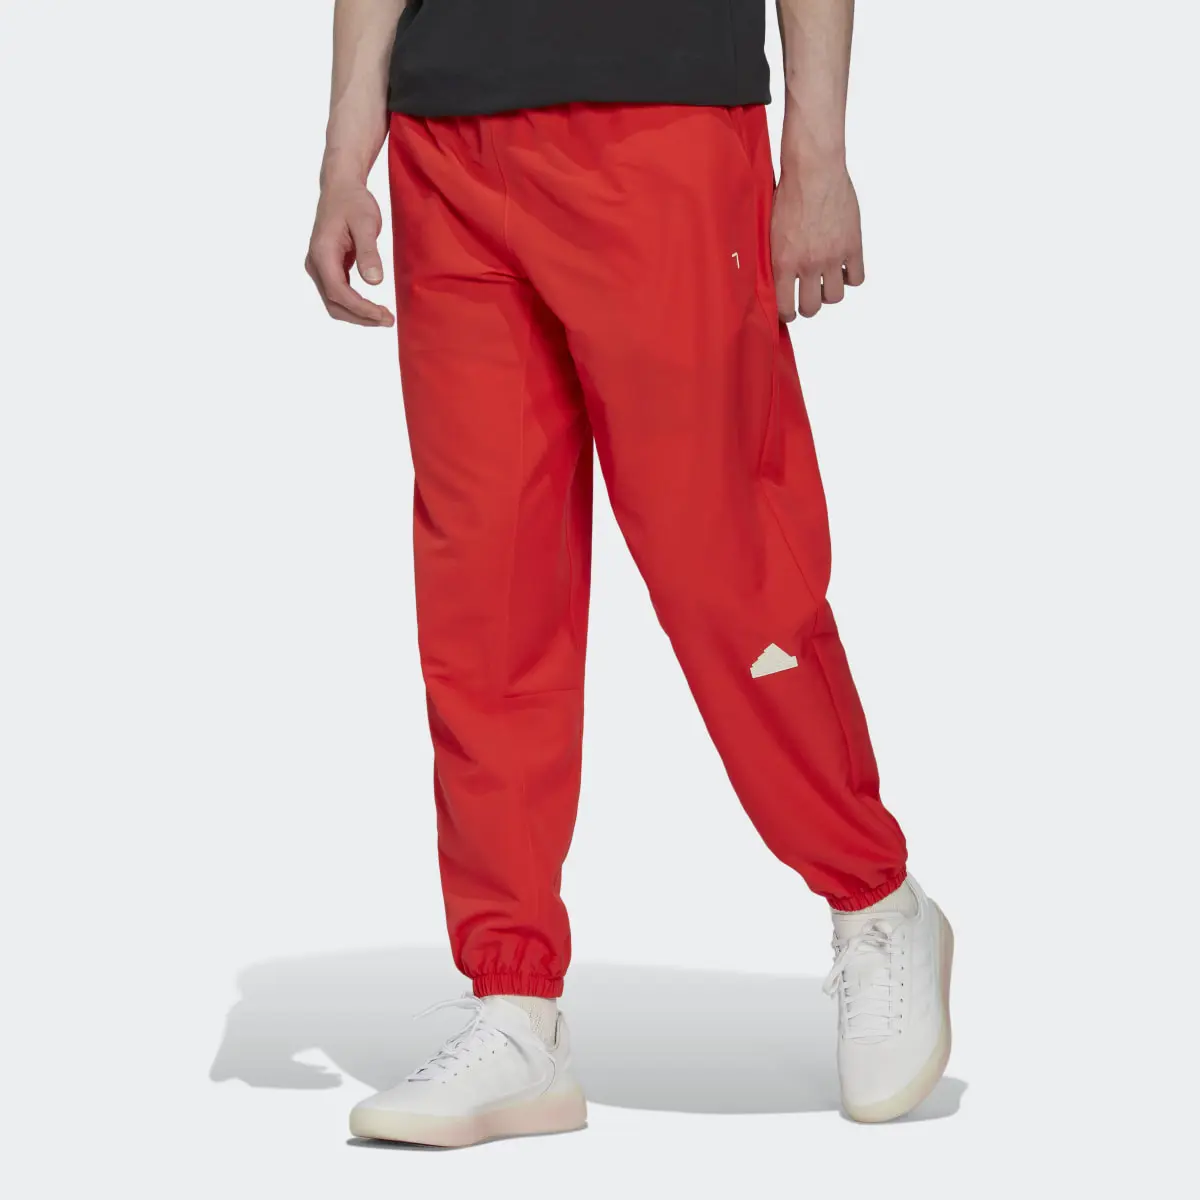 Adidas Woven Tracksuit Bottoms. 1